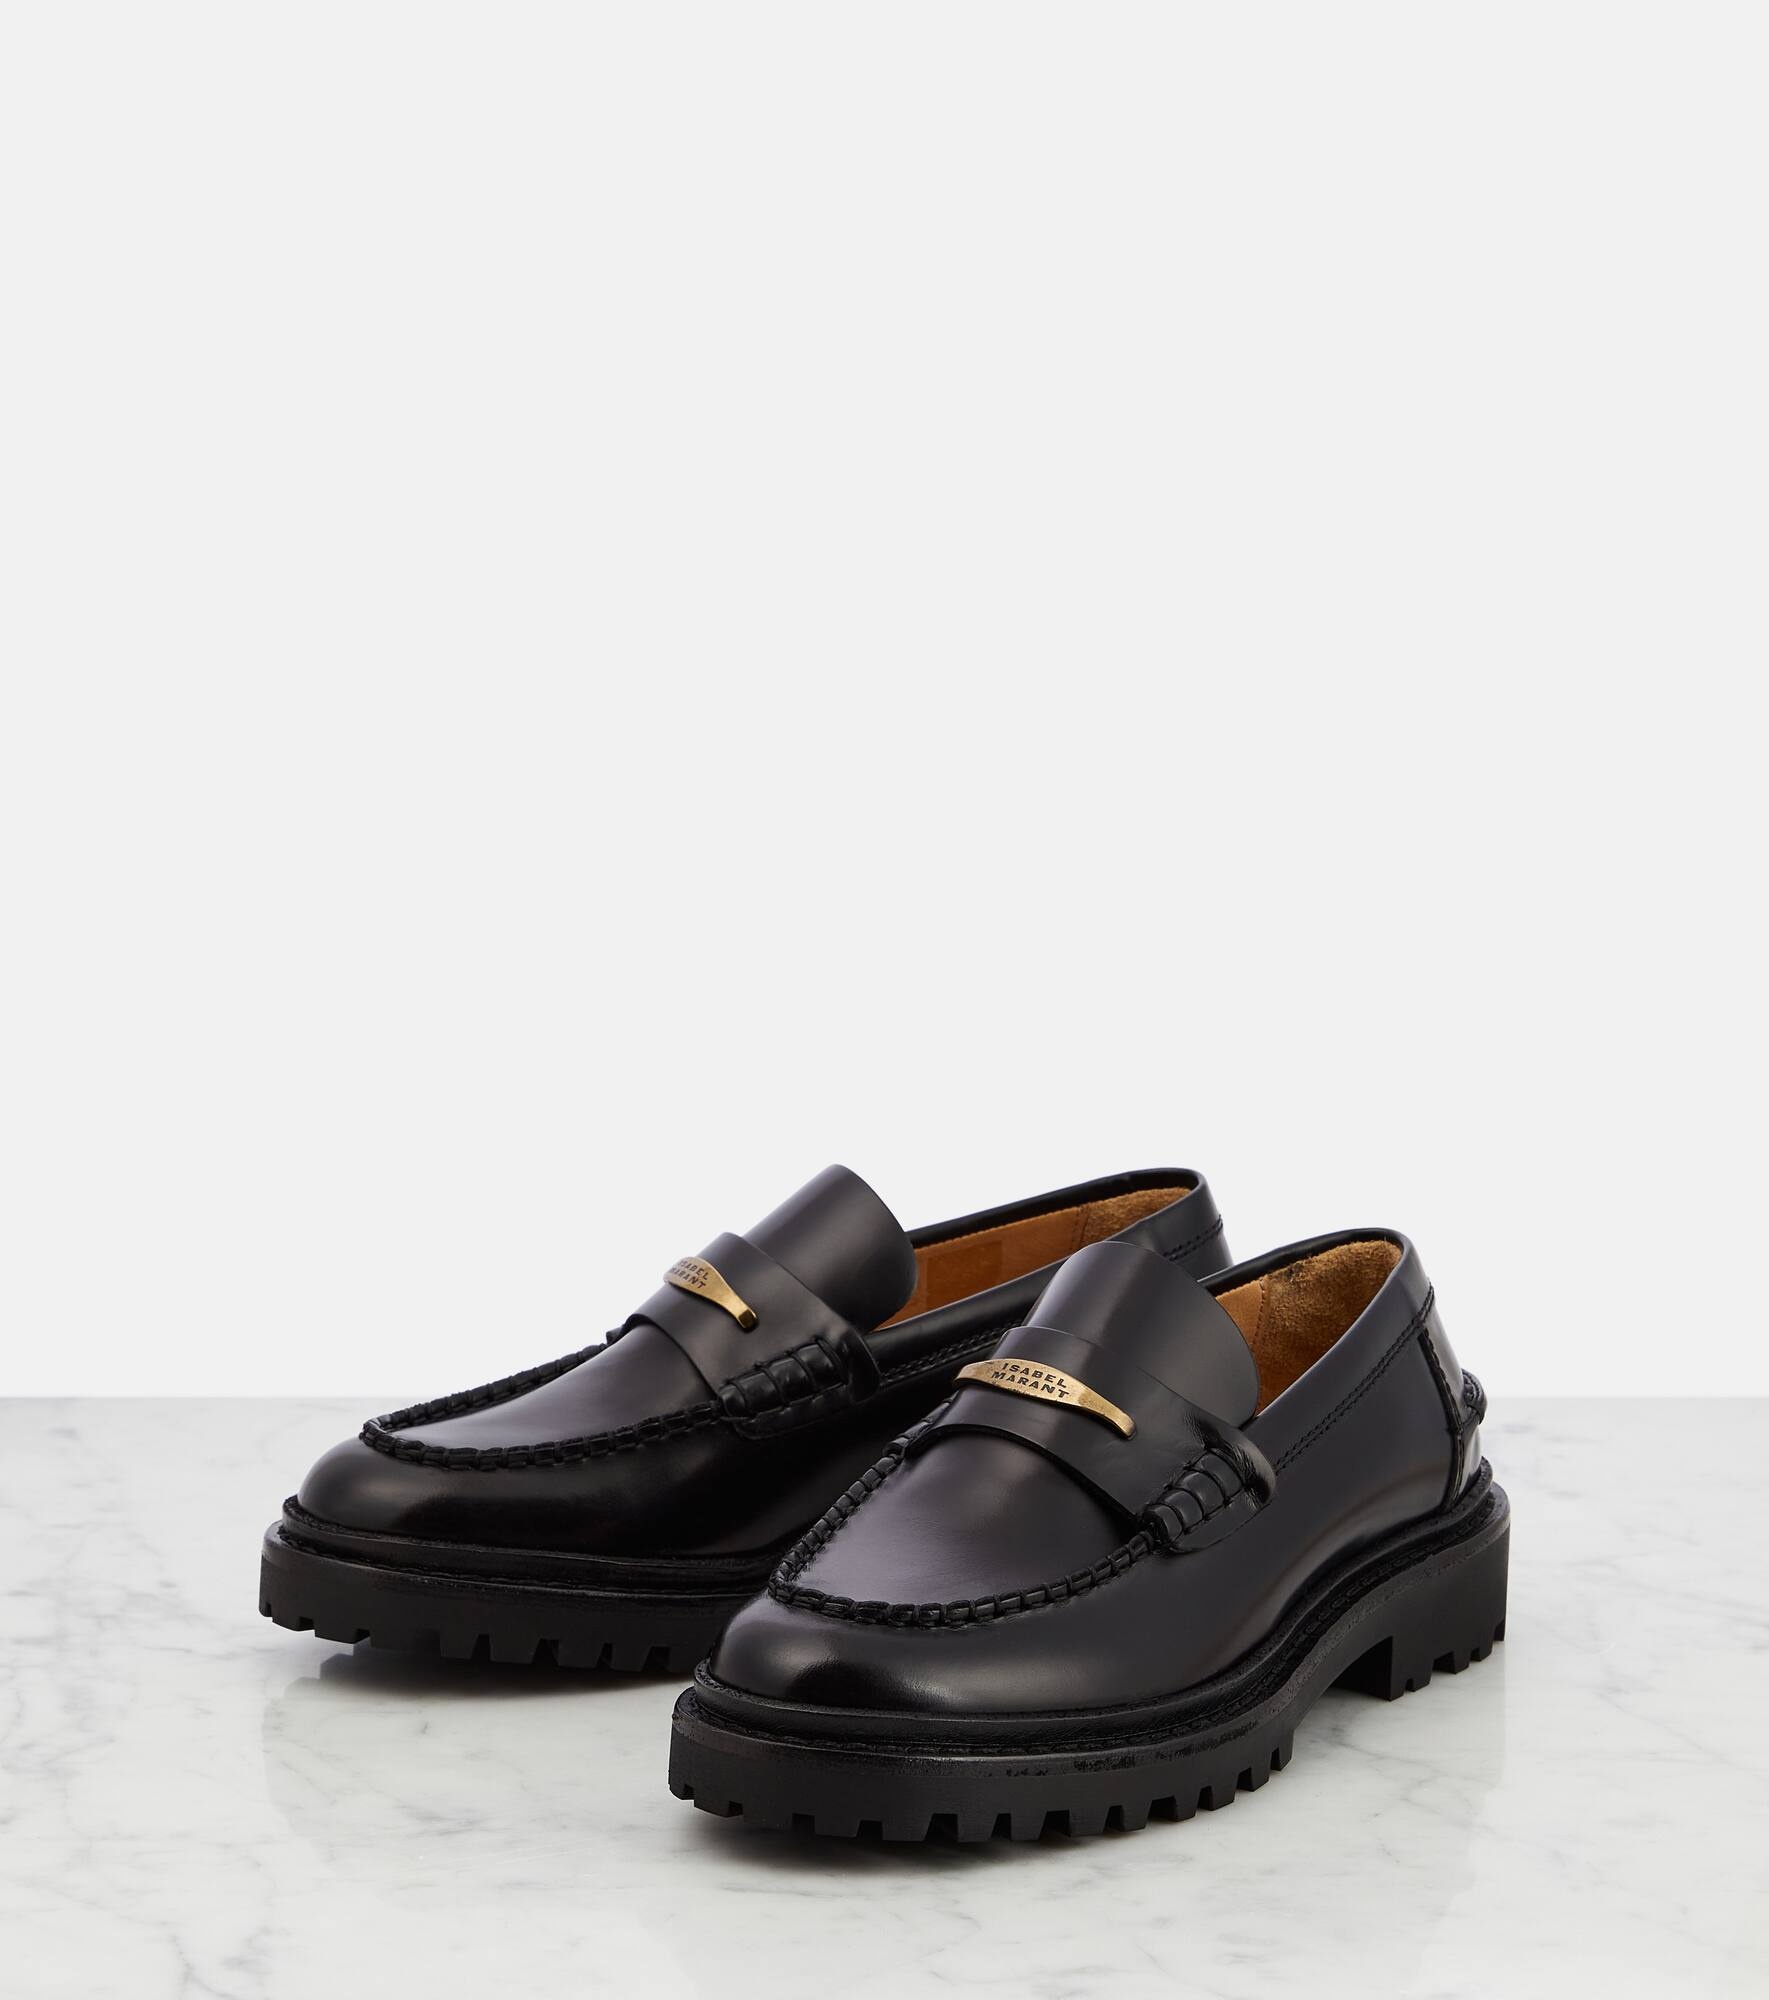 Frezza leather penny loafers - 5